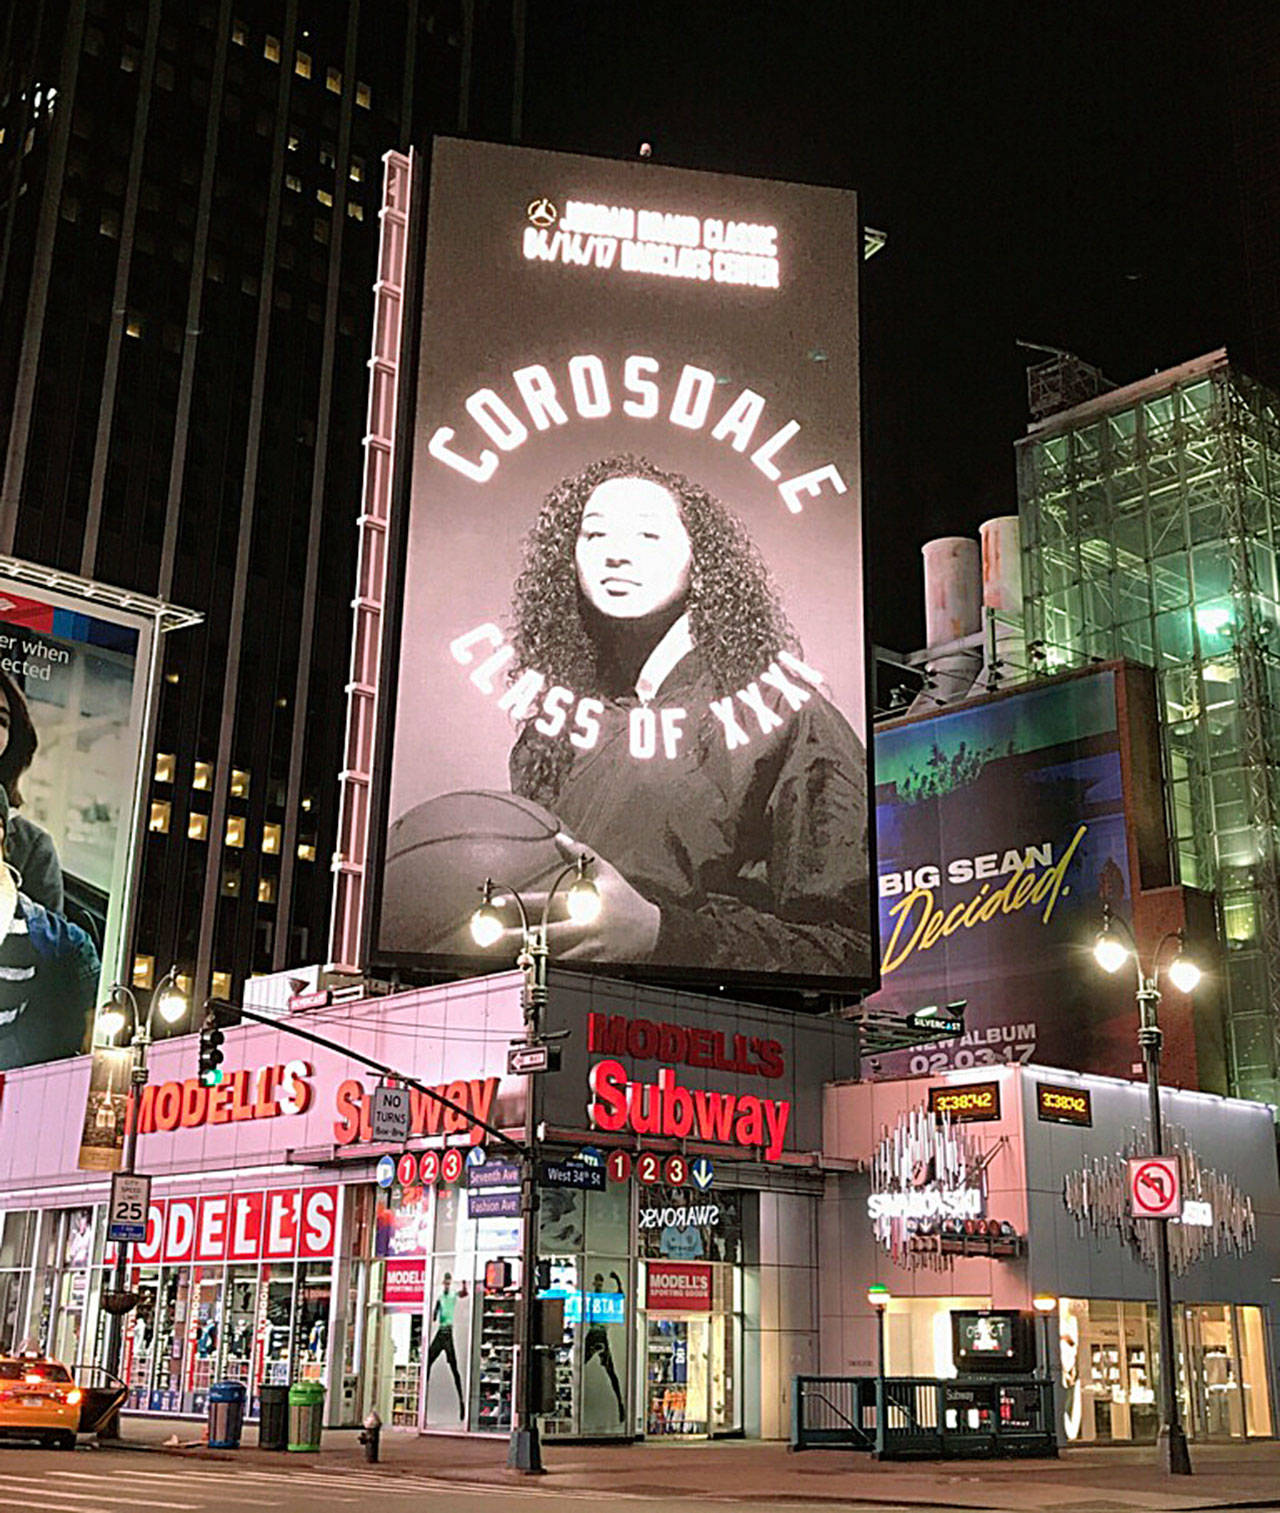 Bothell High senior Taya Corosdale was featured on the big screen in New York’s Times Square last weekend. Corosdale, who is committed to play basketball for Oregon next year, was in New York playing at the Jordan Brand Classic all-star game on April 14 (contributed photo).